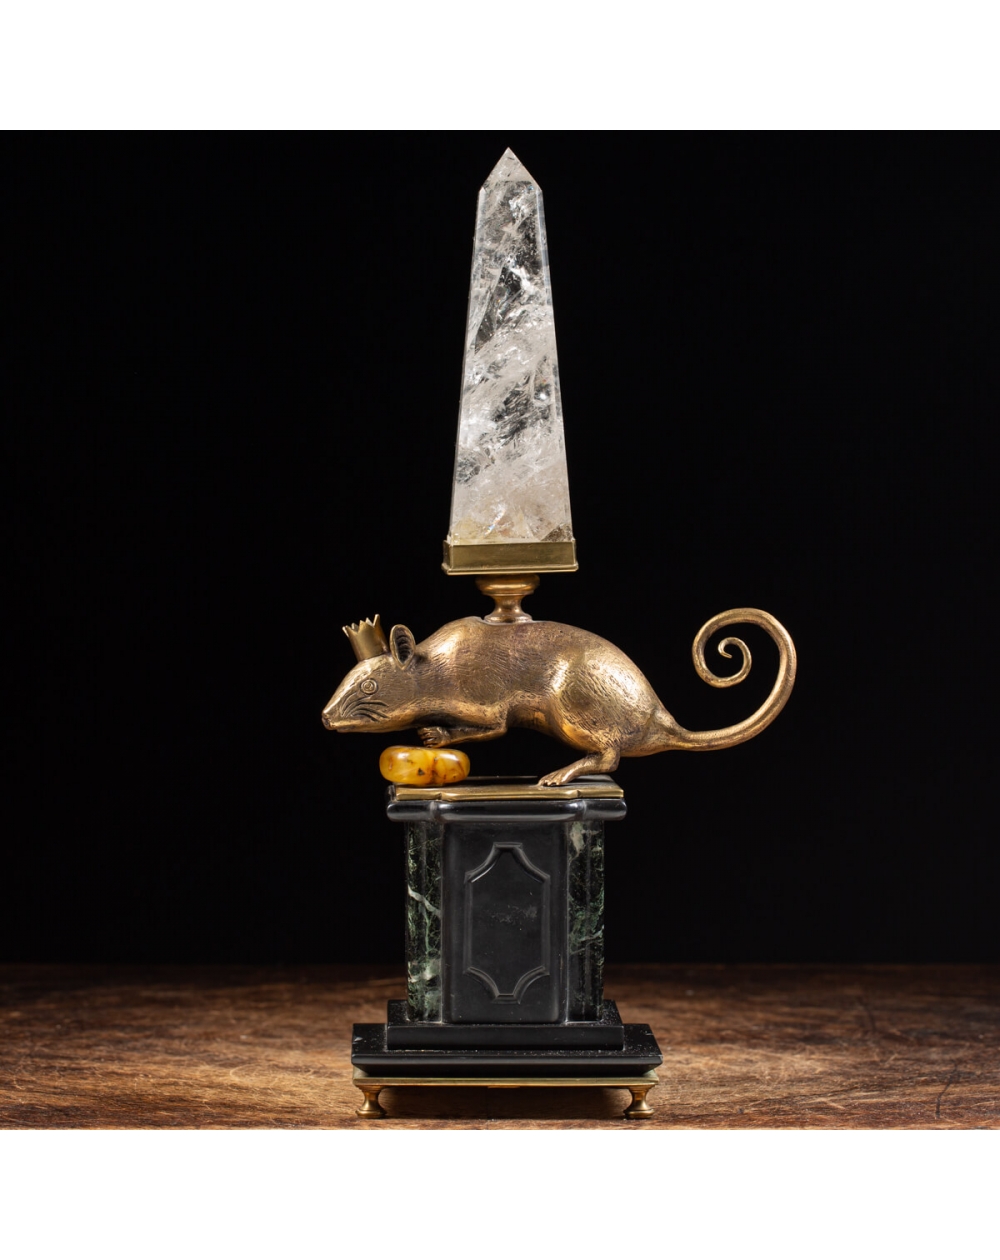 Rodent sculpture with Quartz and Amber